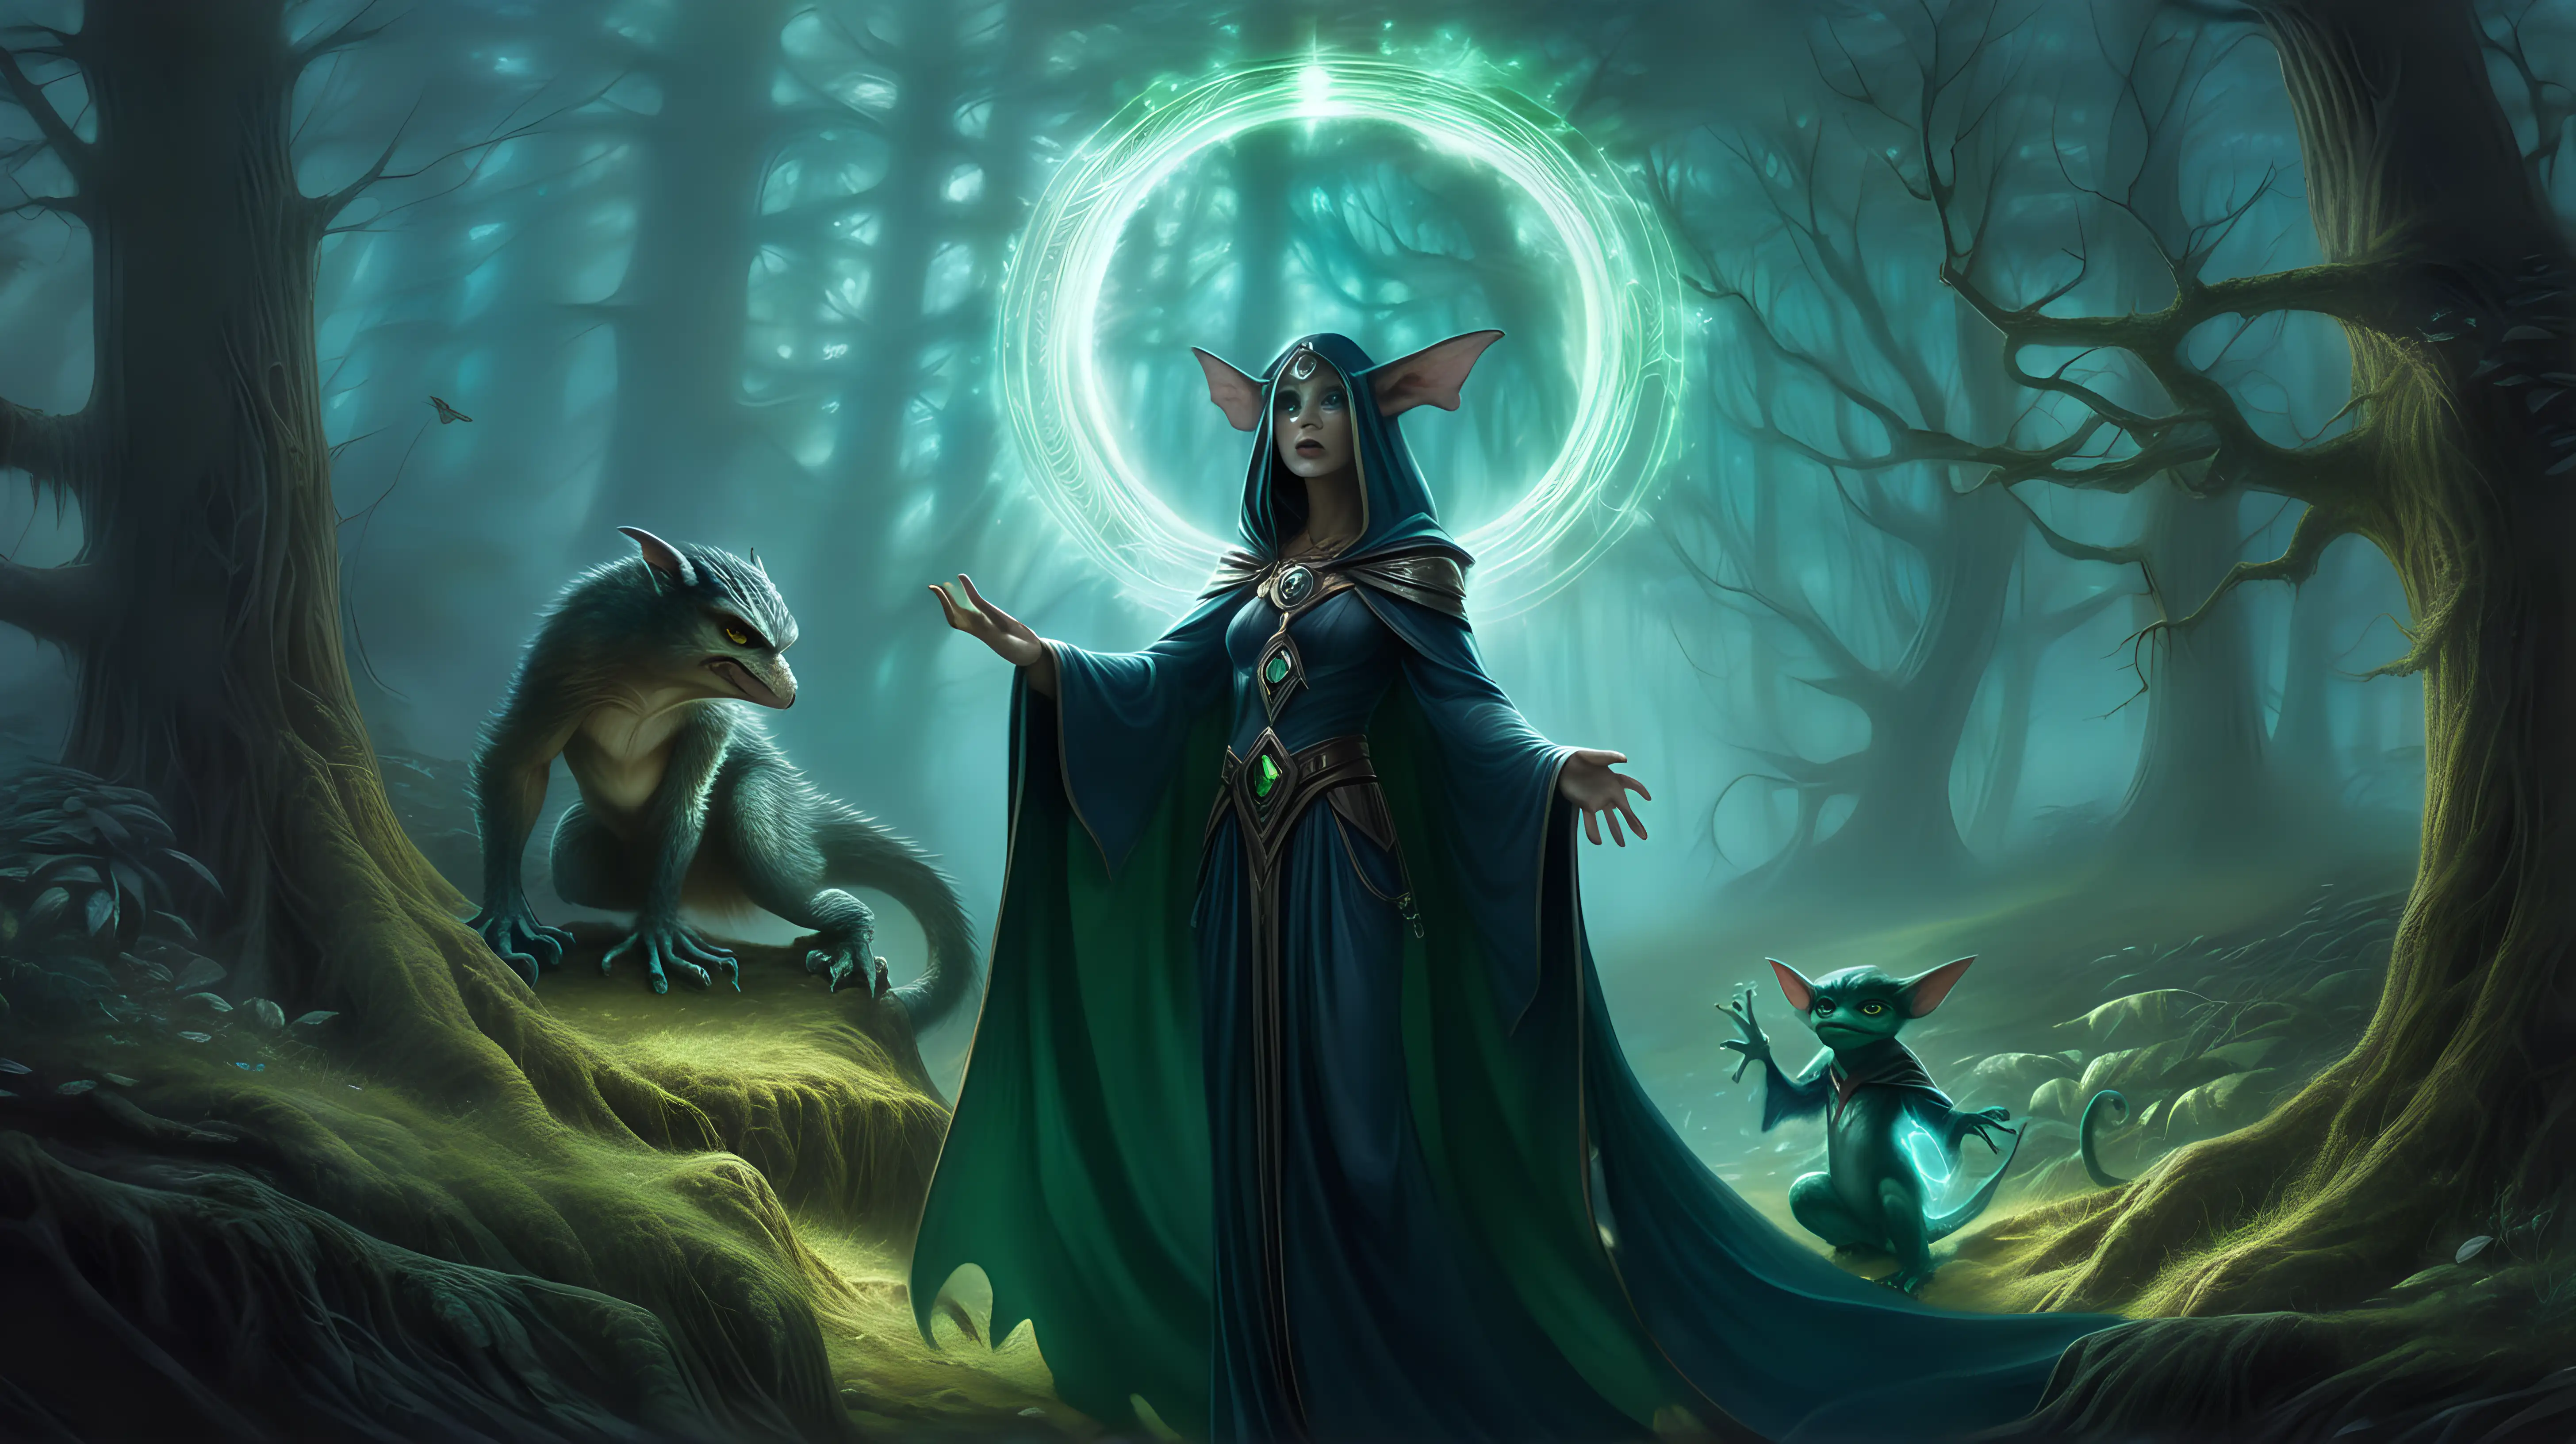 Mystical Sorceress Seeks Guidance with Glowing Halo in Enchanted Forest